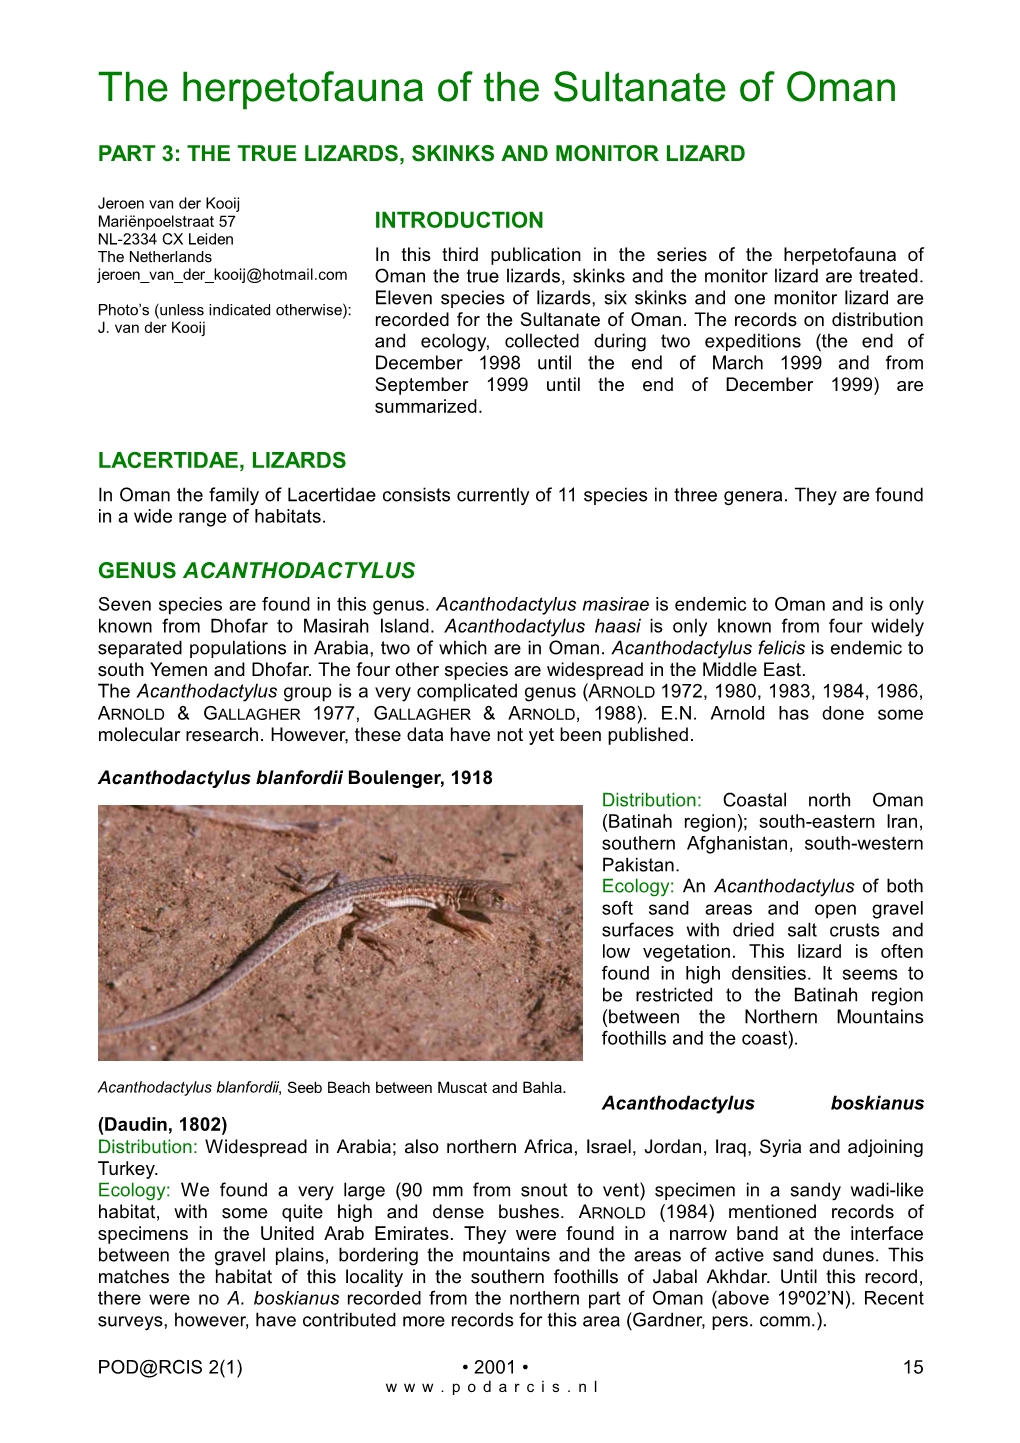 The Herpetofauna of the Sultanate of Oman